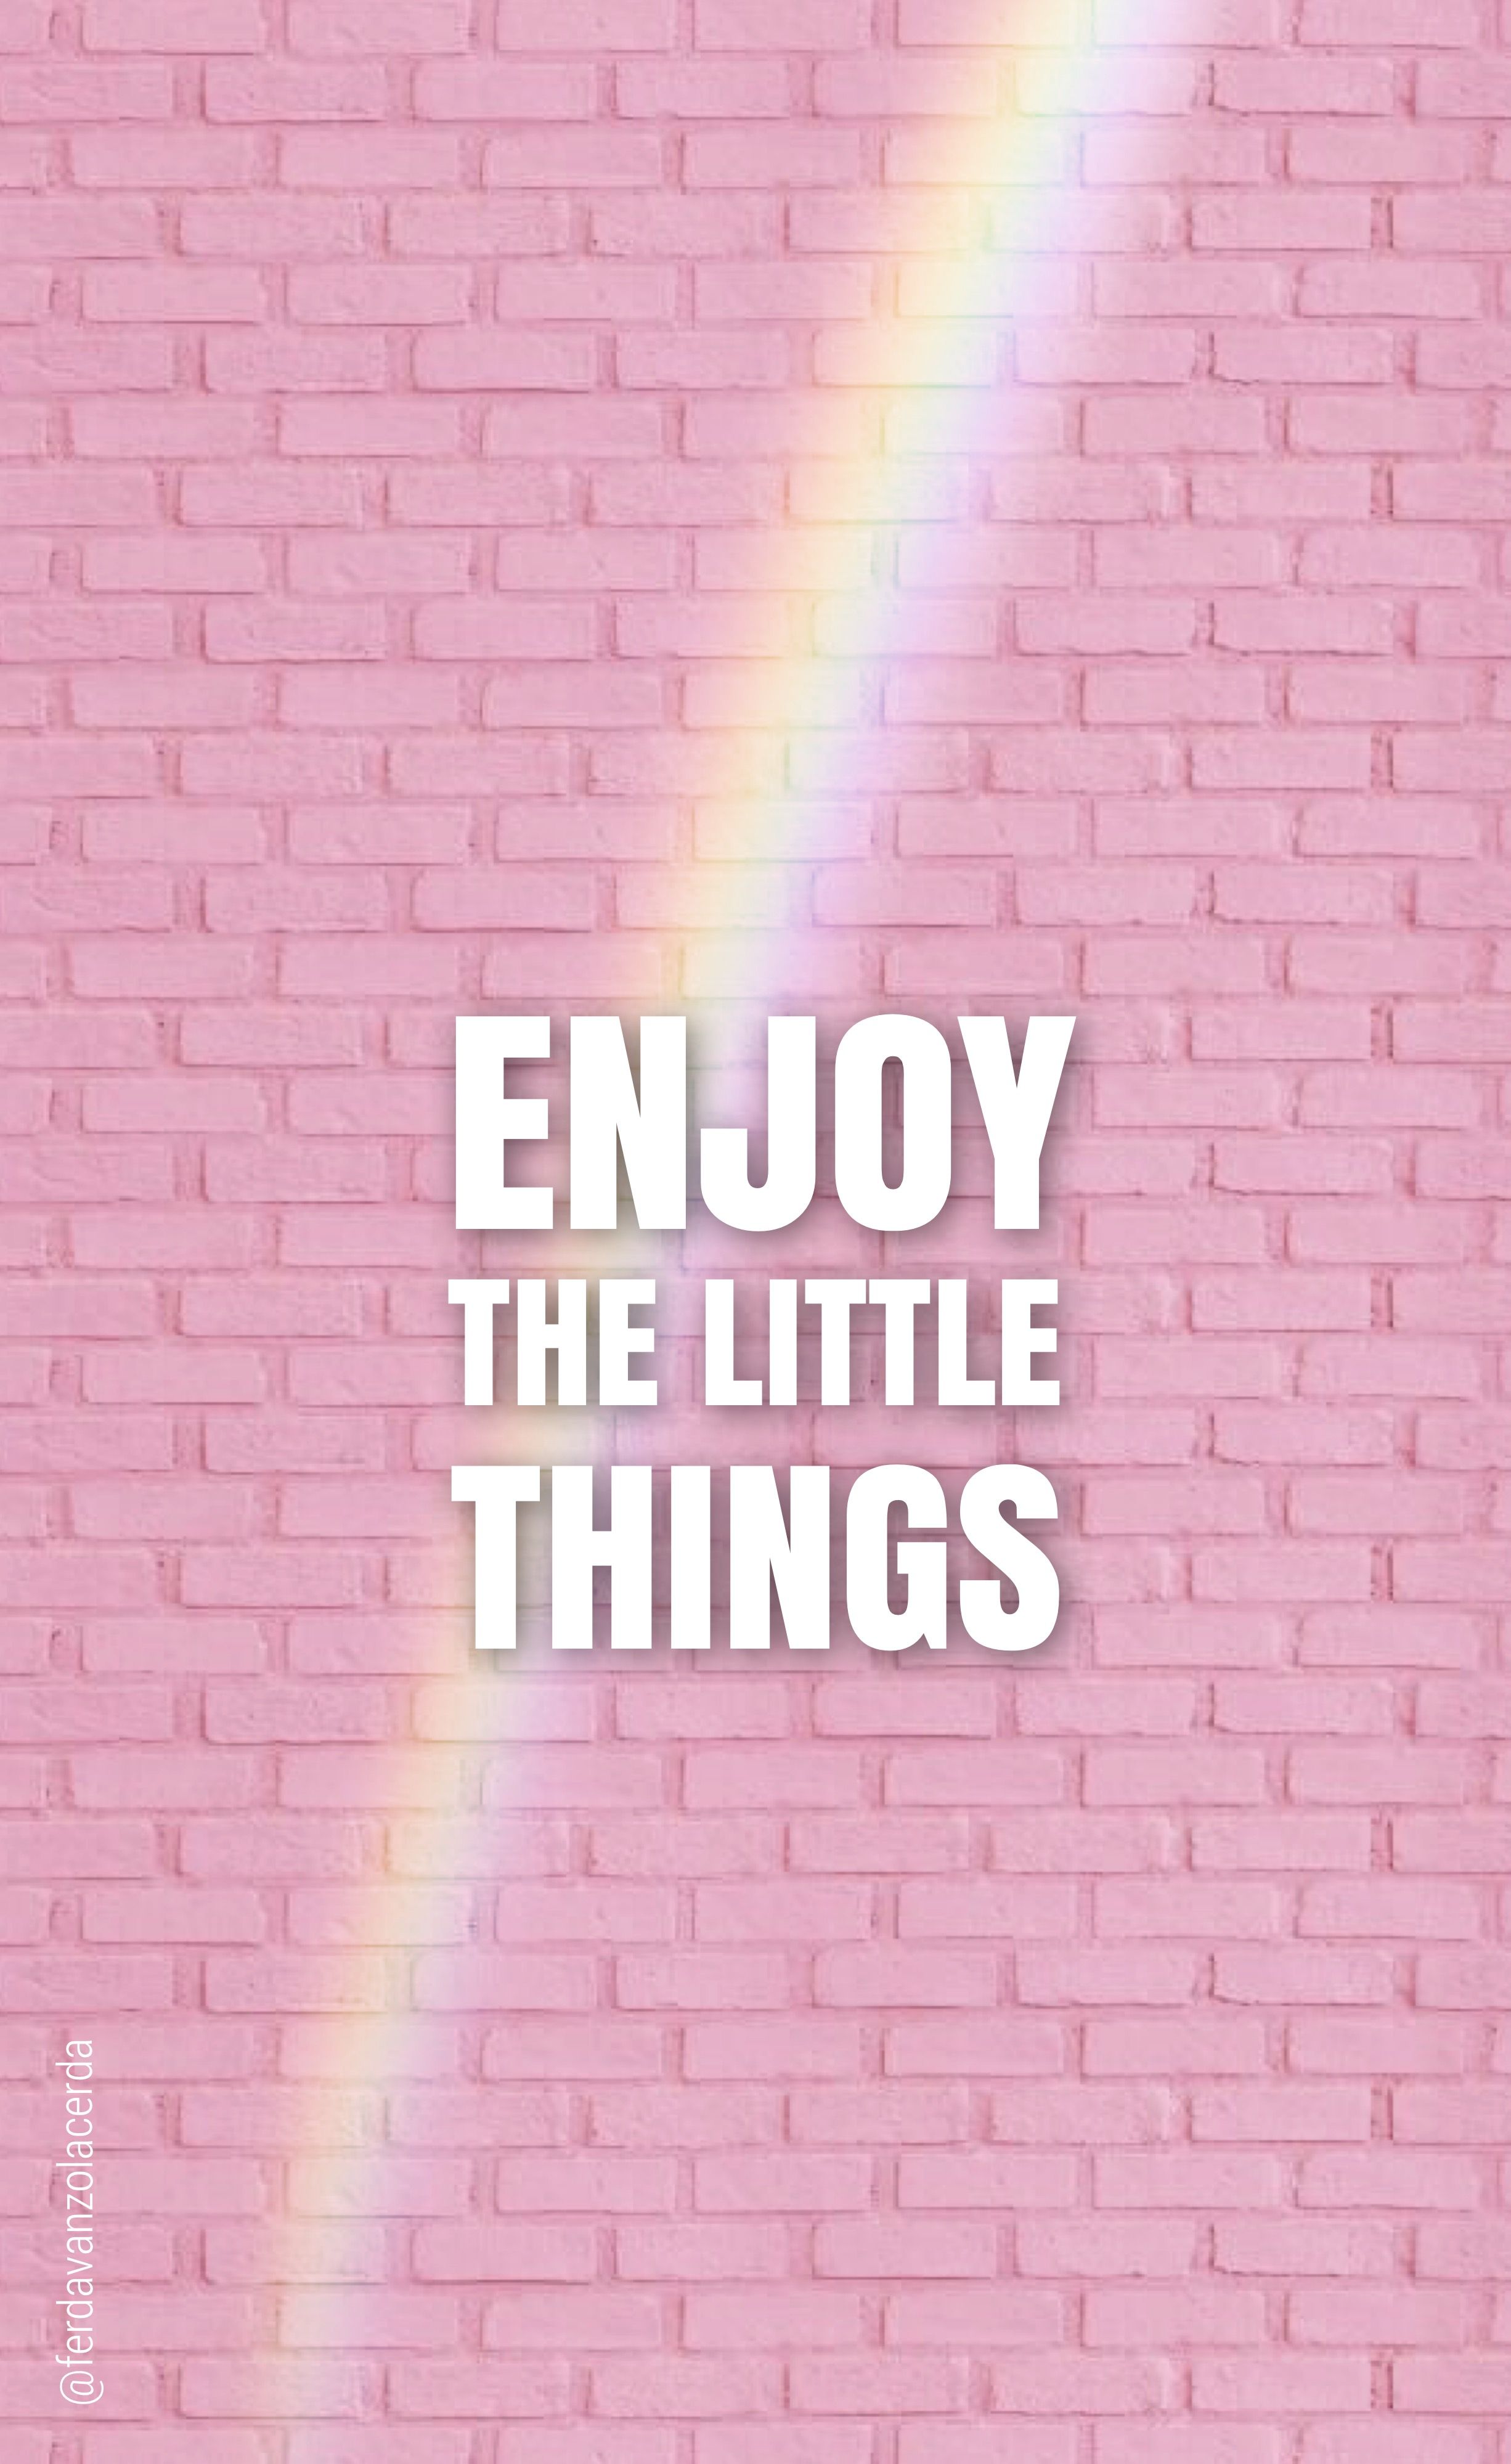 Enjoy the little things. Wallpaper iphone cute, Pink wallpaper iphone, Cute wallpaper background